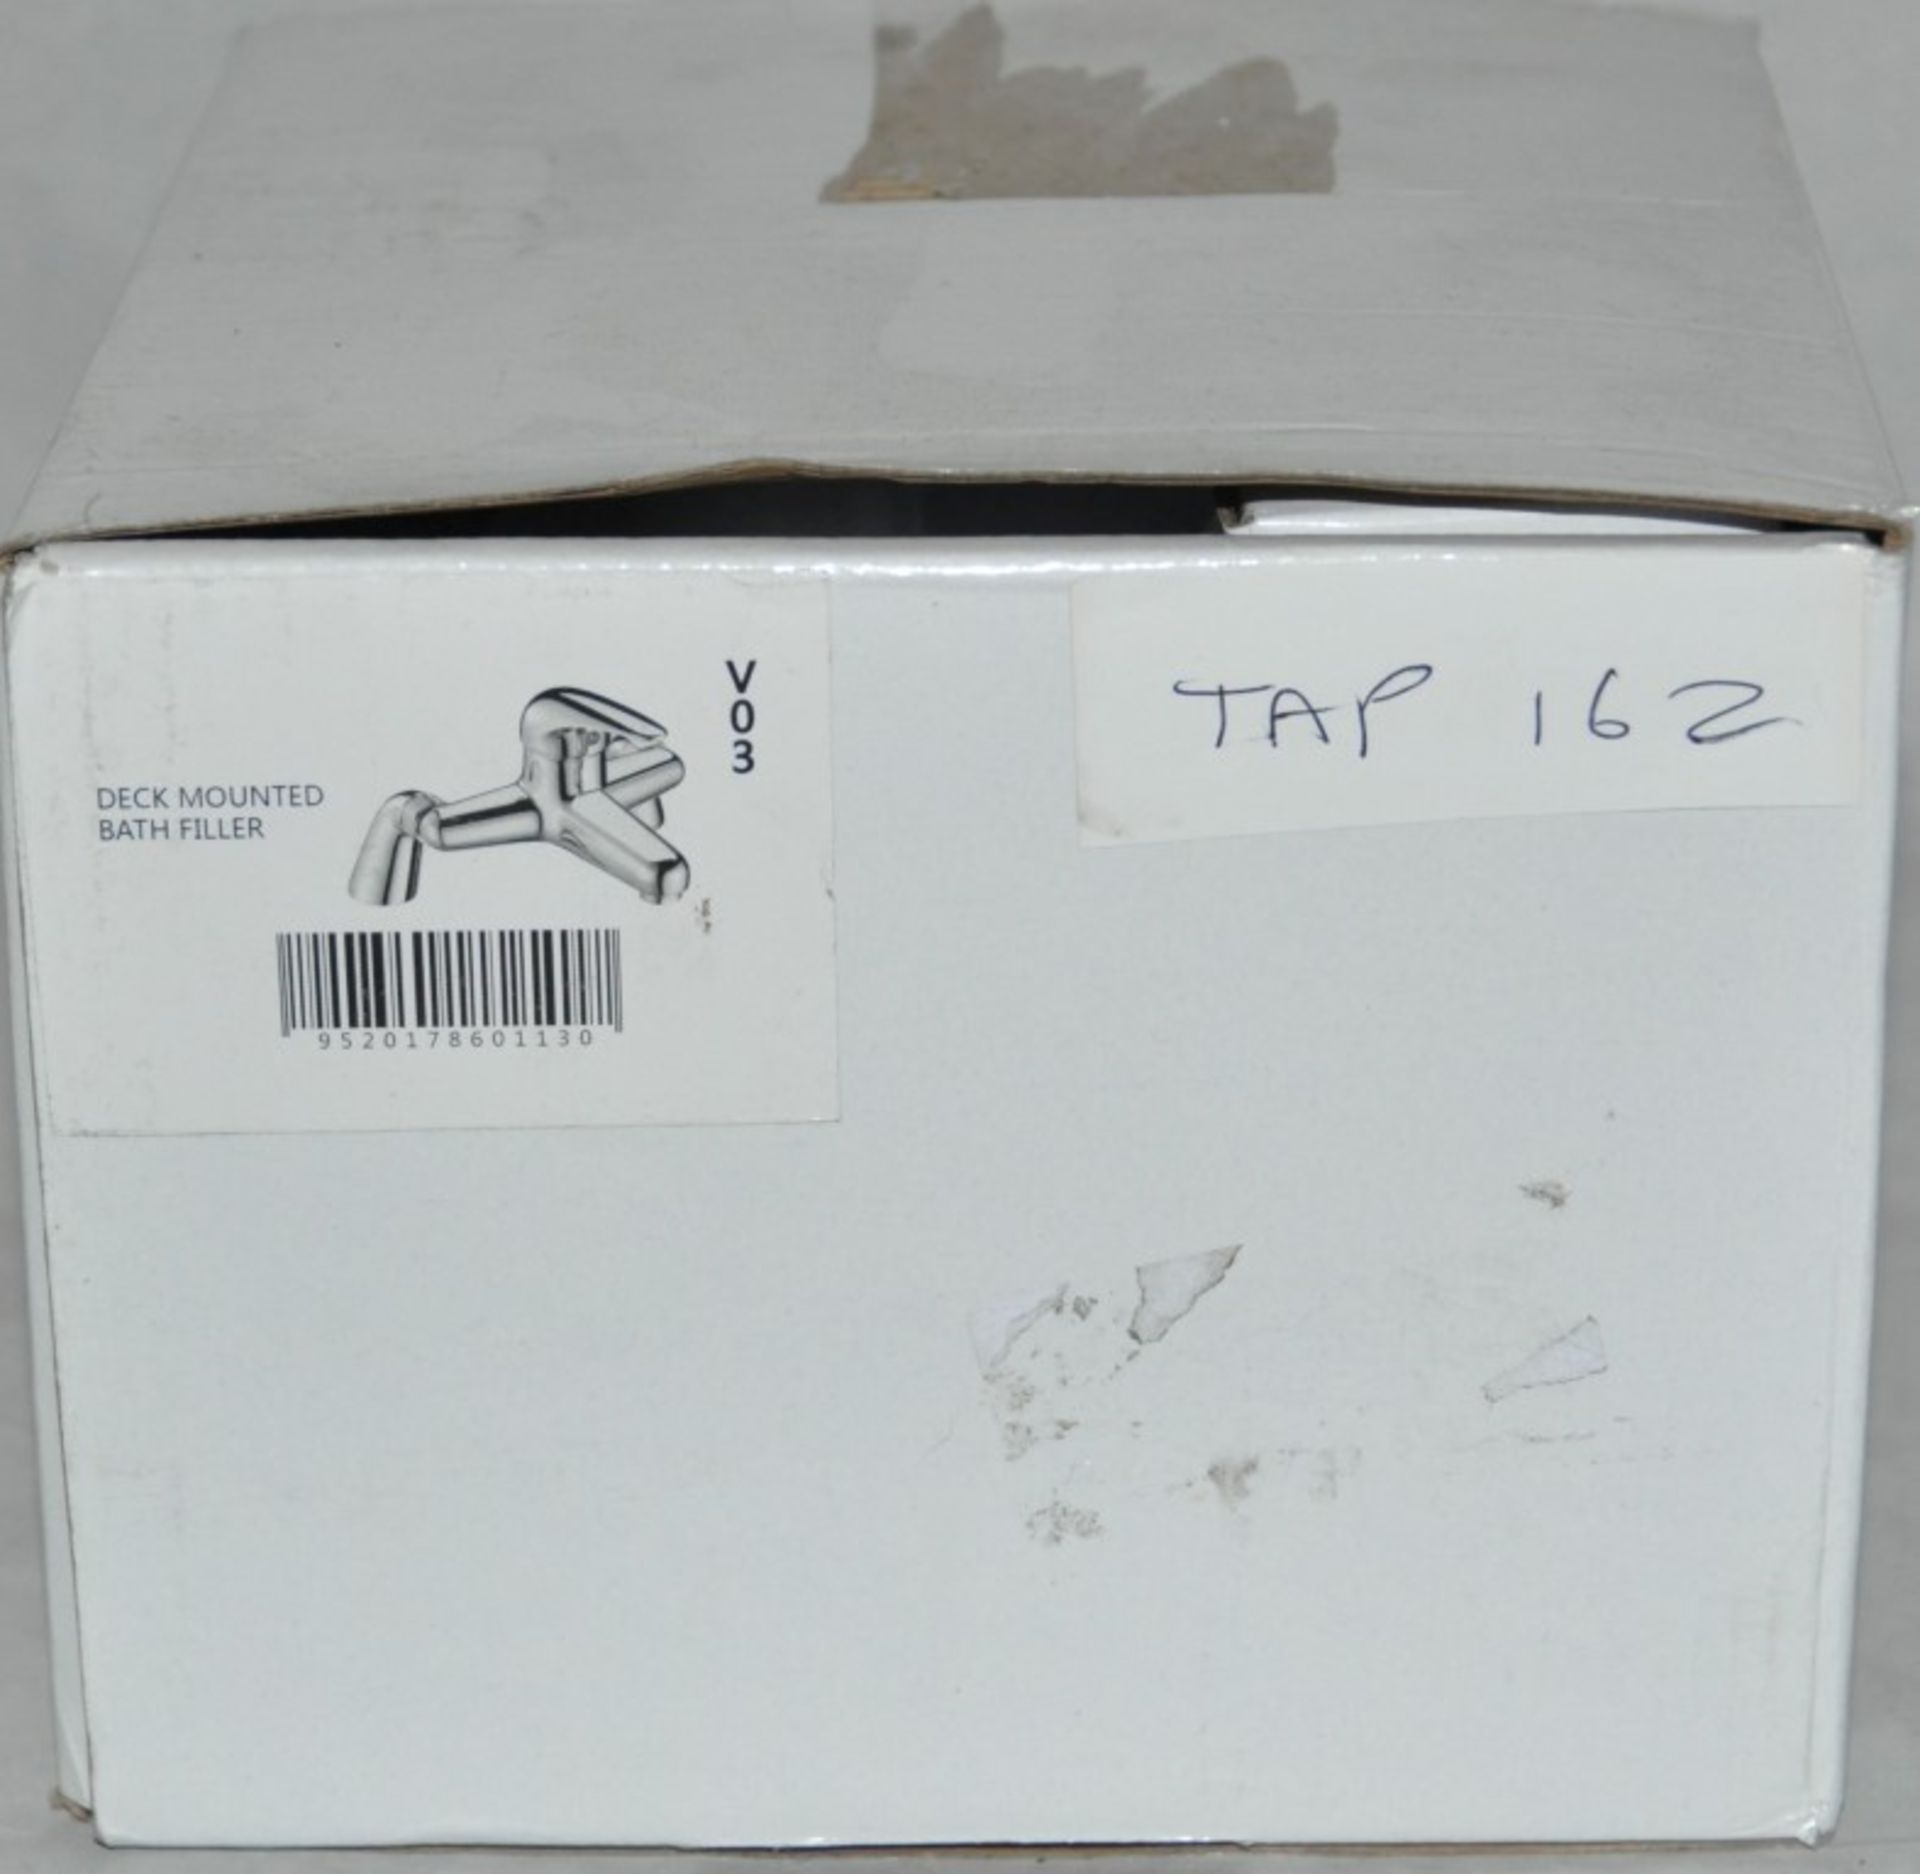 1 x Chrome Bath Filler – Used Commercial Samples - Boxed in Good Condition – Complete – Model : - Image 3 of 6